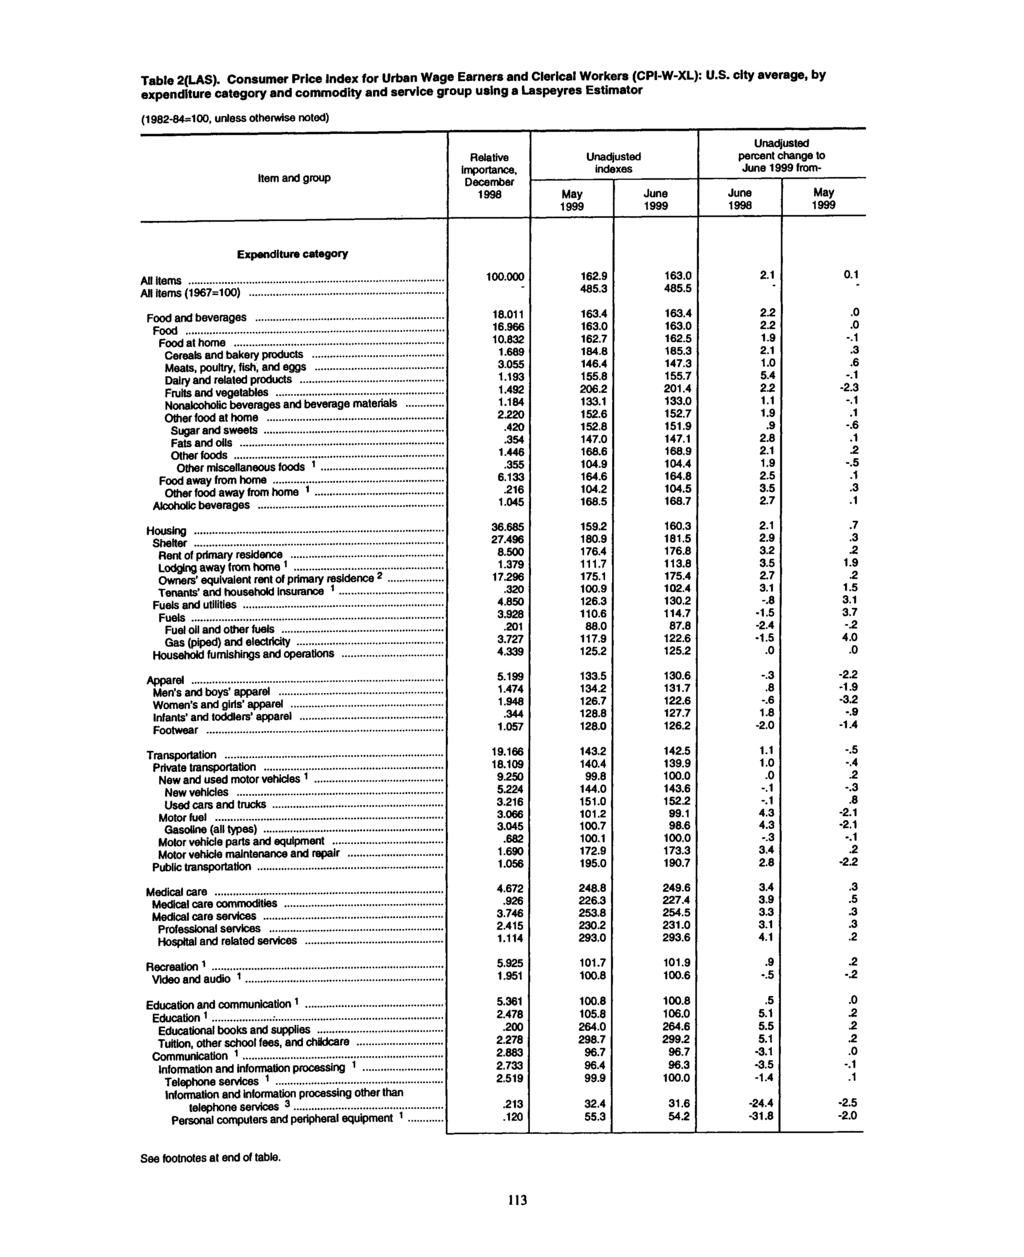 Table 2(LAS). Consumer Price for Urban Wage Earners and Clerical Workers (CPI-W-XL): U.S. city average, by expenditure category and commodity and service group using a Laspeyres Estimator Relative importance.